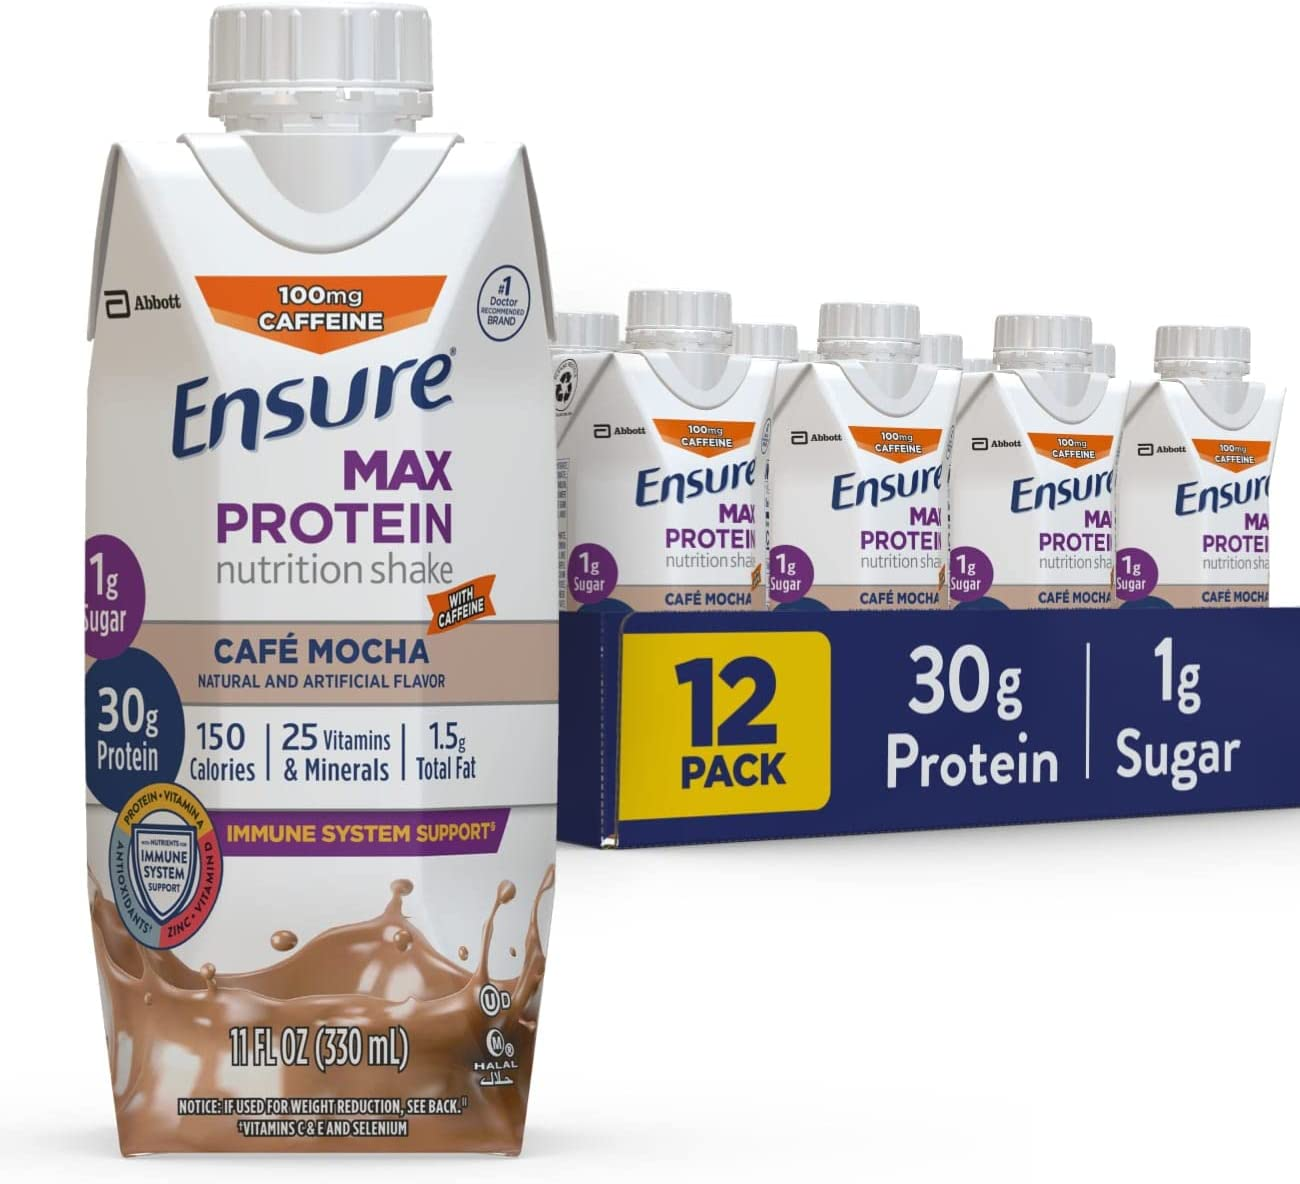 Amazon.com: Ensure Max Protein Nutritional Shake with 30g of Protein, 1g of Sugar, High Protein Shake, Cafe Mocha, 11 Fl Oz (Pack of 12) : Health & Household $28.78